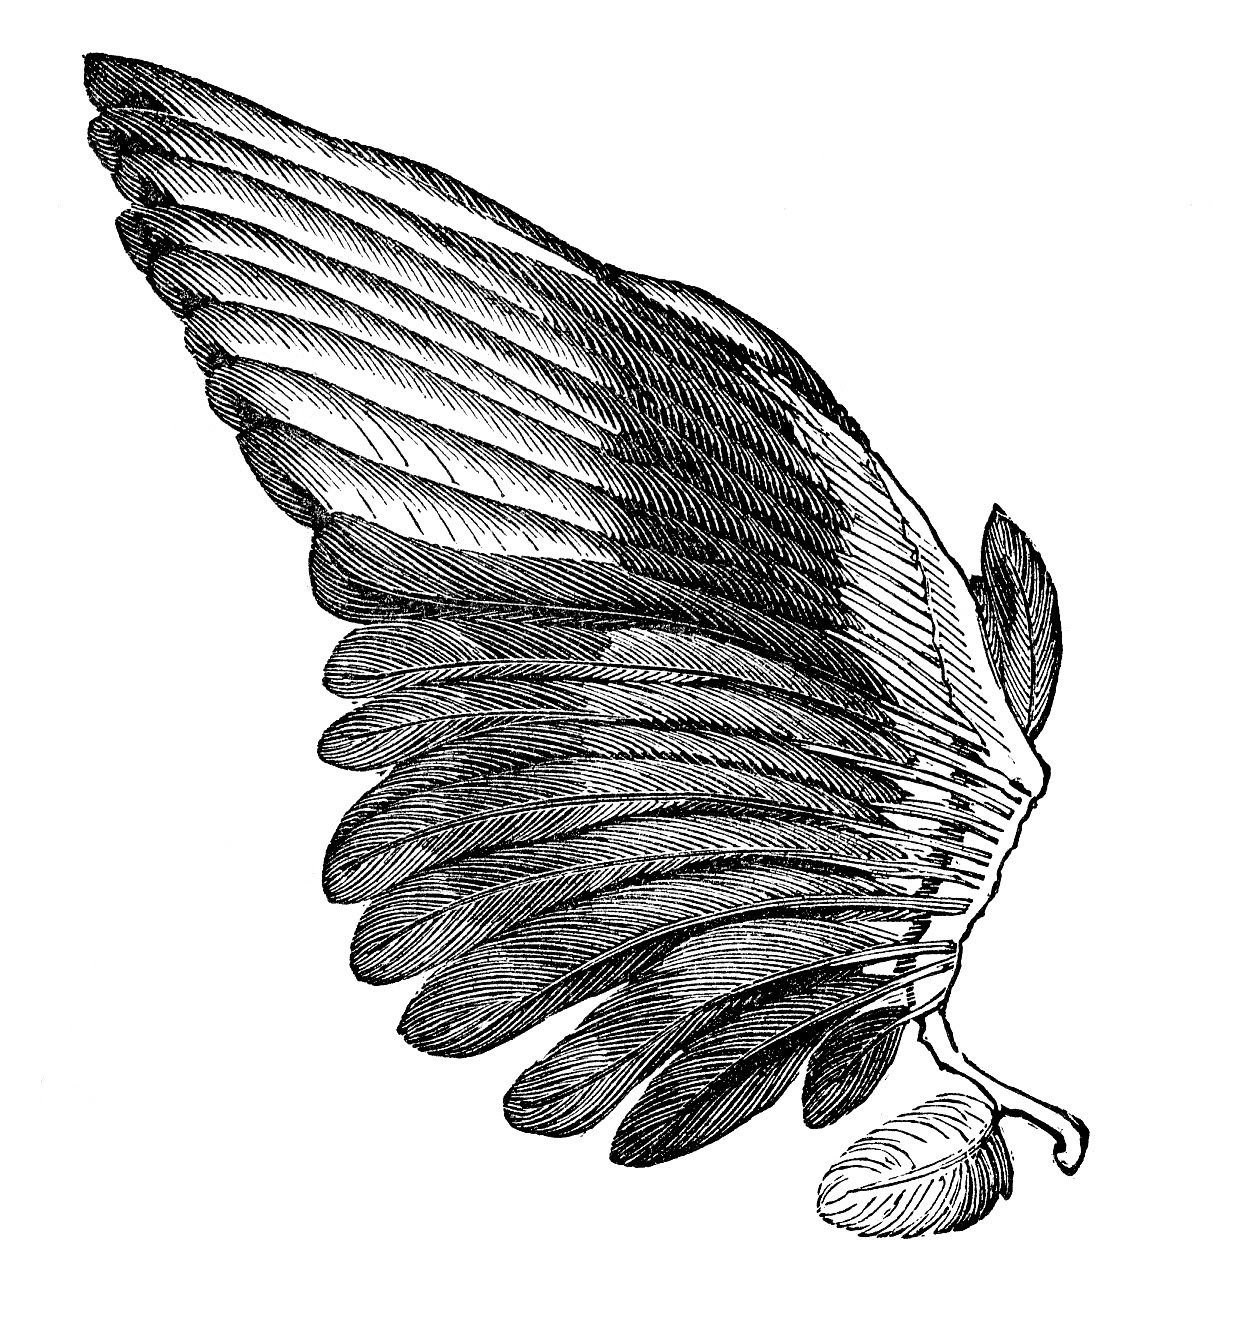 Black Wings Clipart transparent PNG - StickPNG